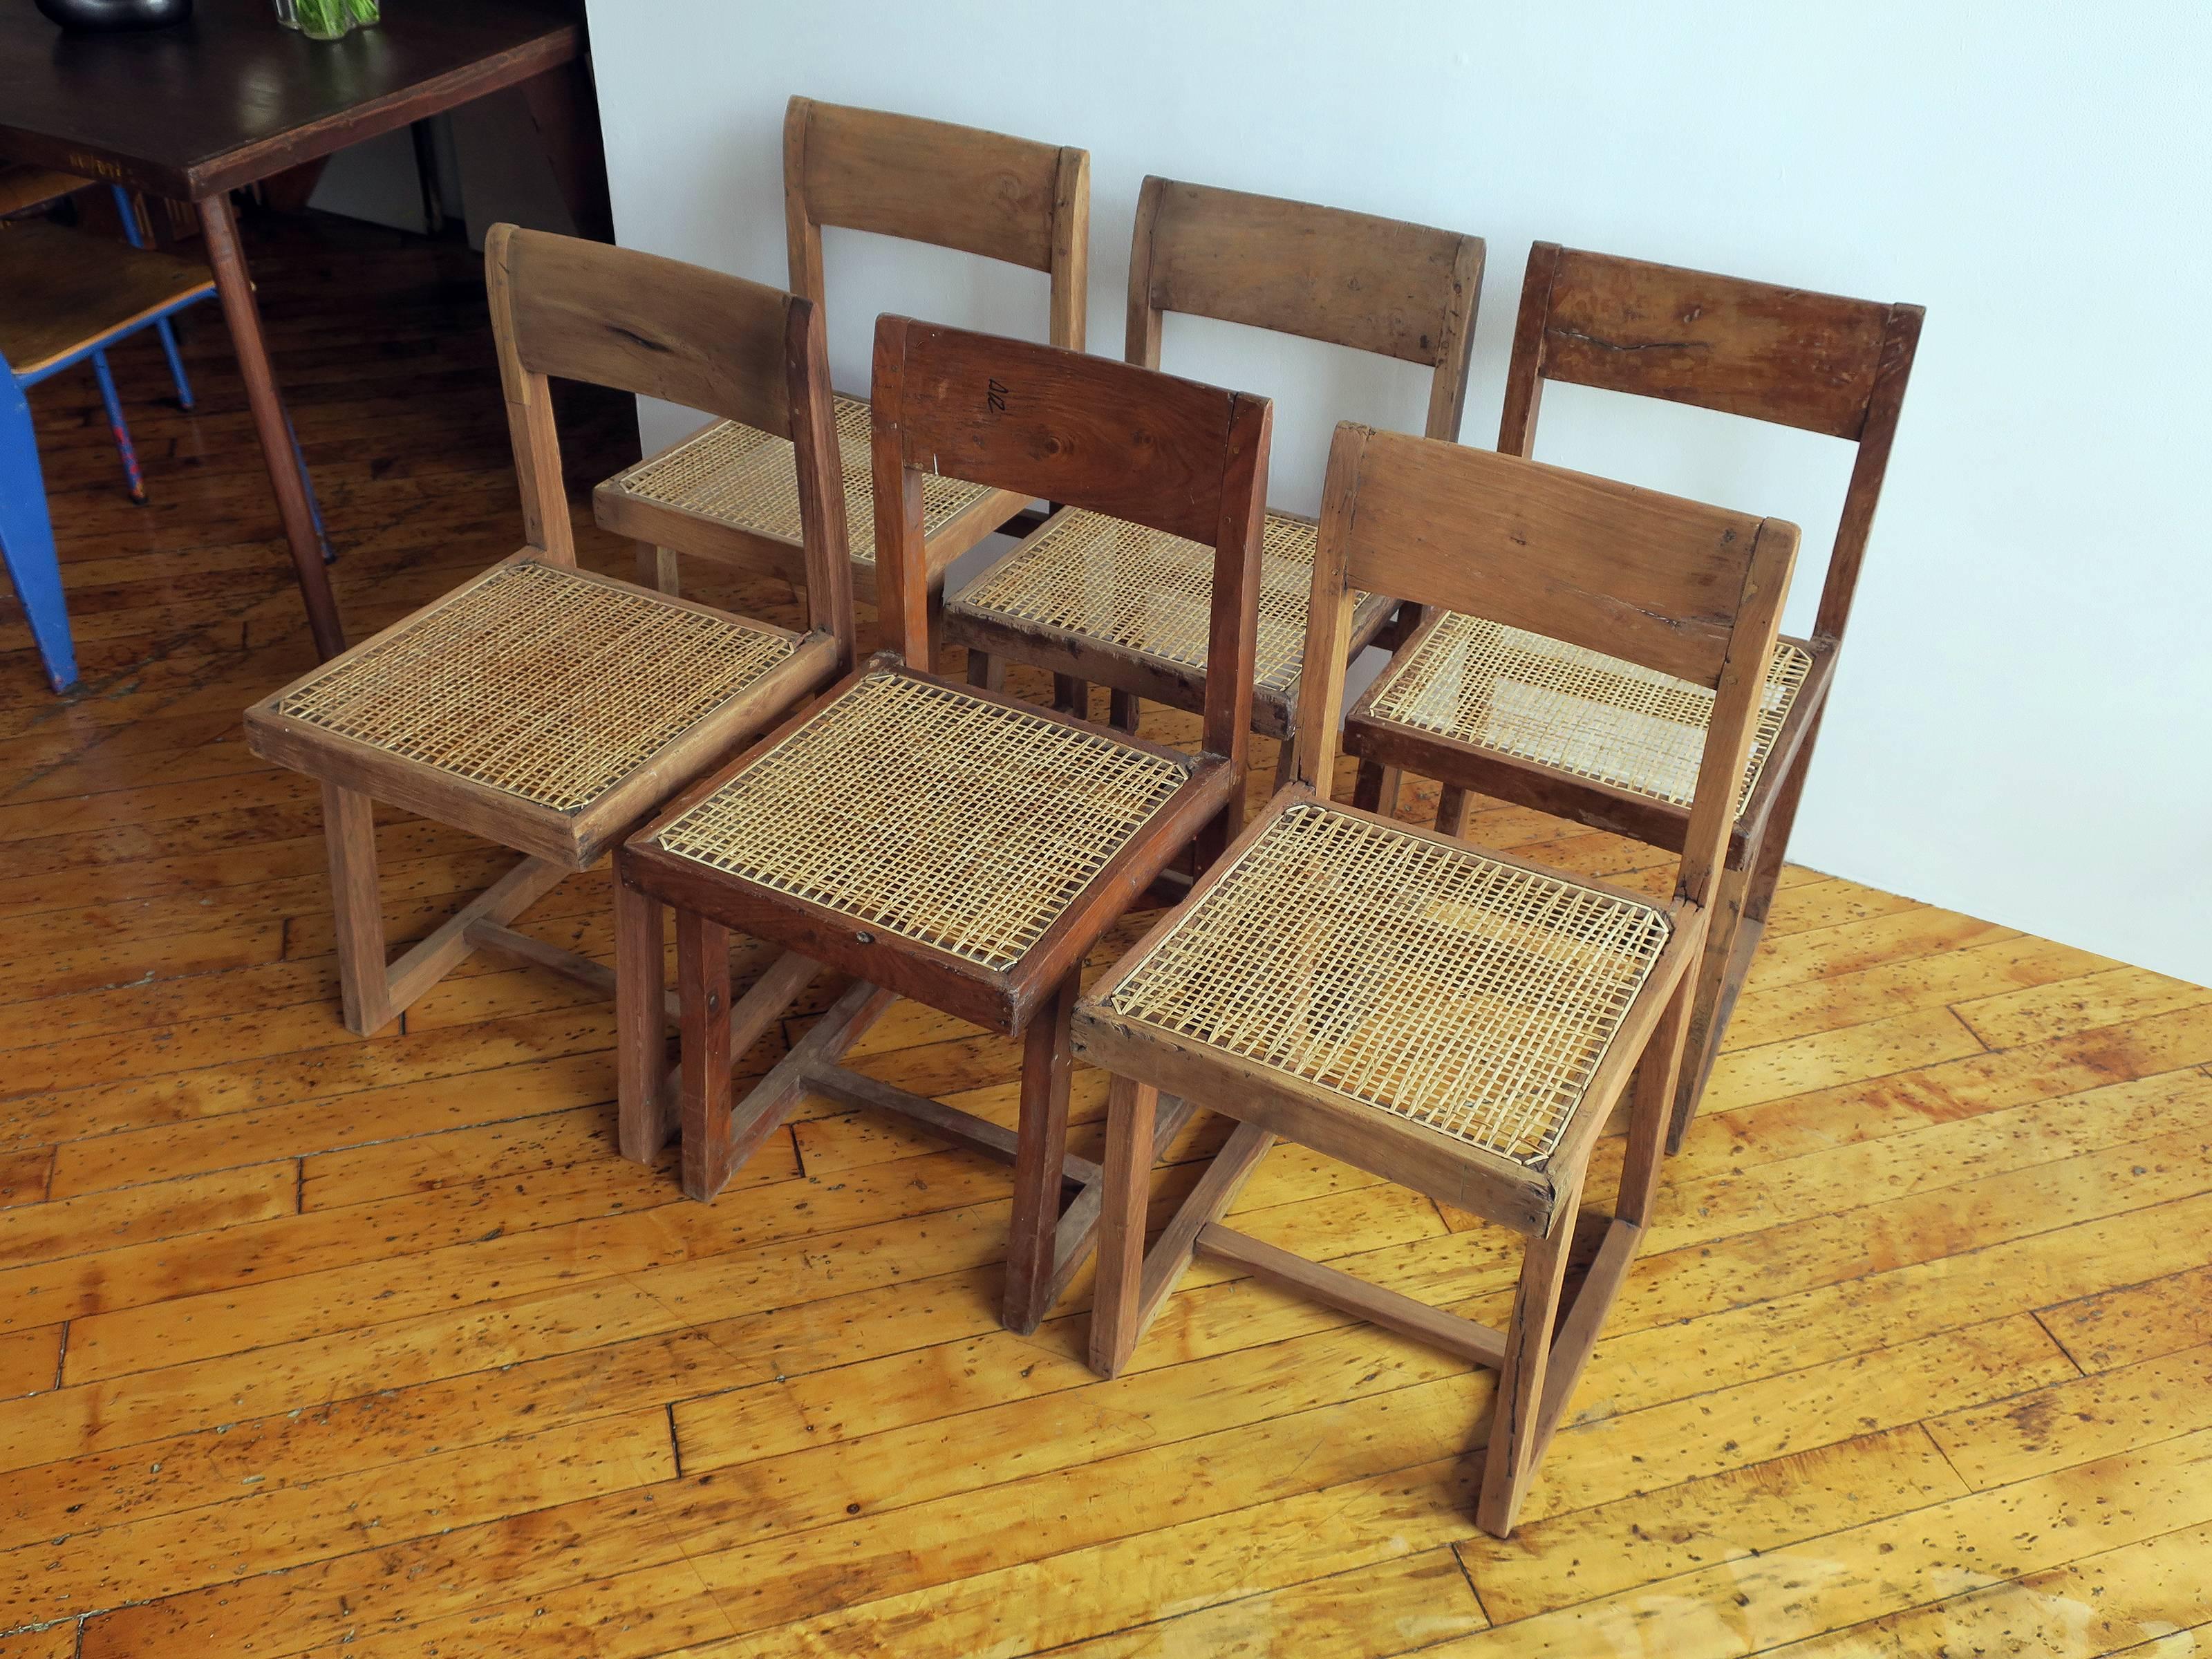 A very rare set of six “Box” frame chairs, Model No.PJ-SI-54-A from Punjab University, Chandigarh, India, in original condition. The chair frames were washed, not re-stained, and newly caned to preserve the history of the pieces. Chairs can be waxed